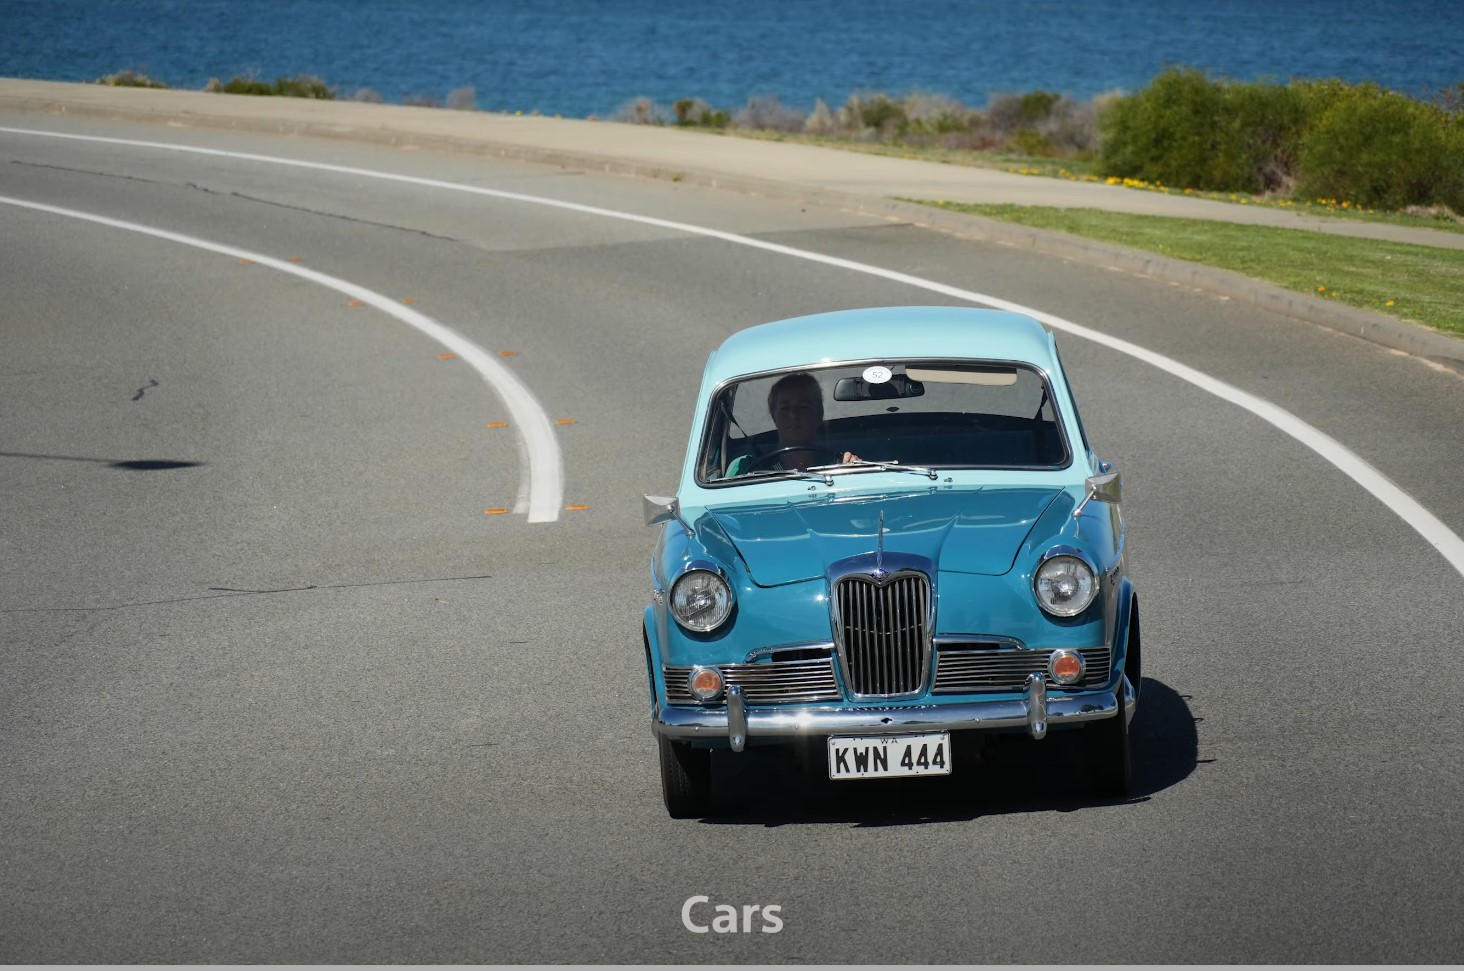 Example of AI of Sony Alpha 6700 camera with cars